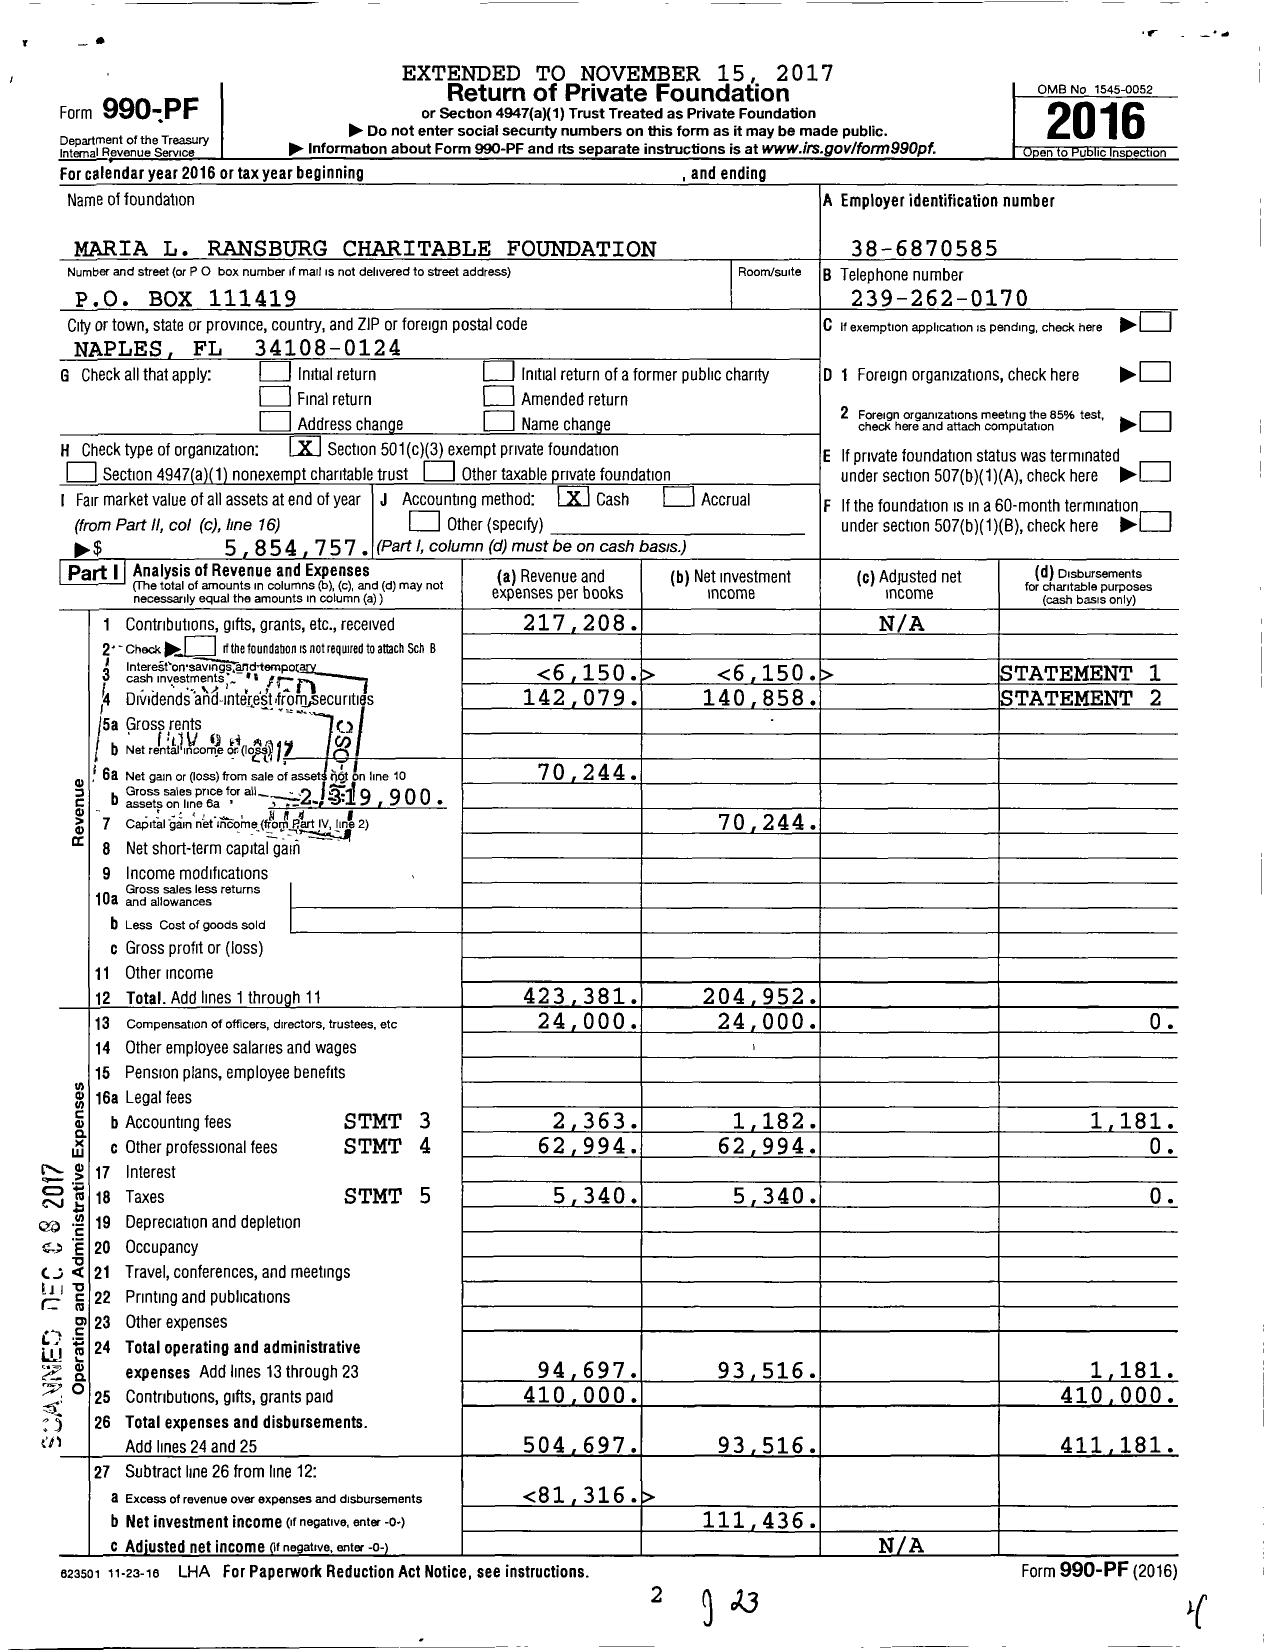 Image of first page of 2016 Form 990PF for Maria L Ransburg Charitable Foundation